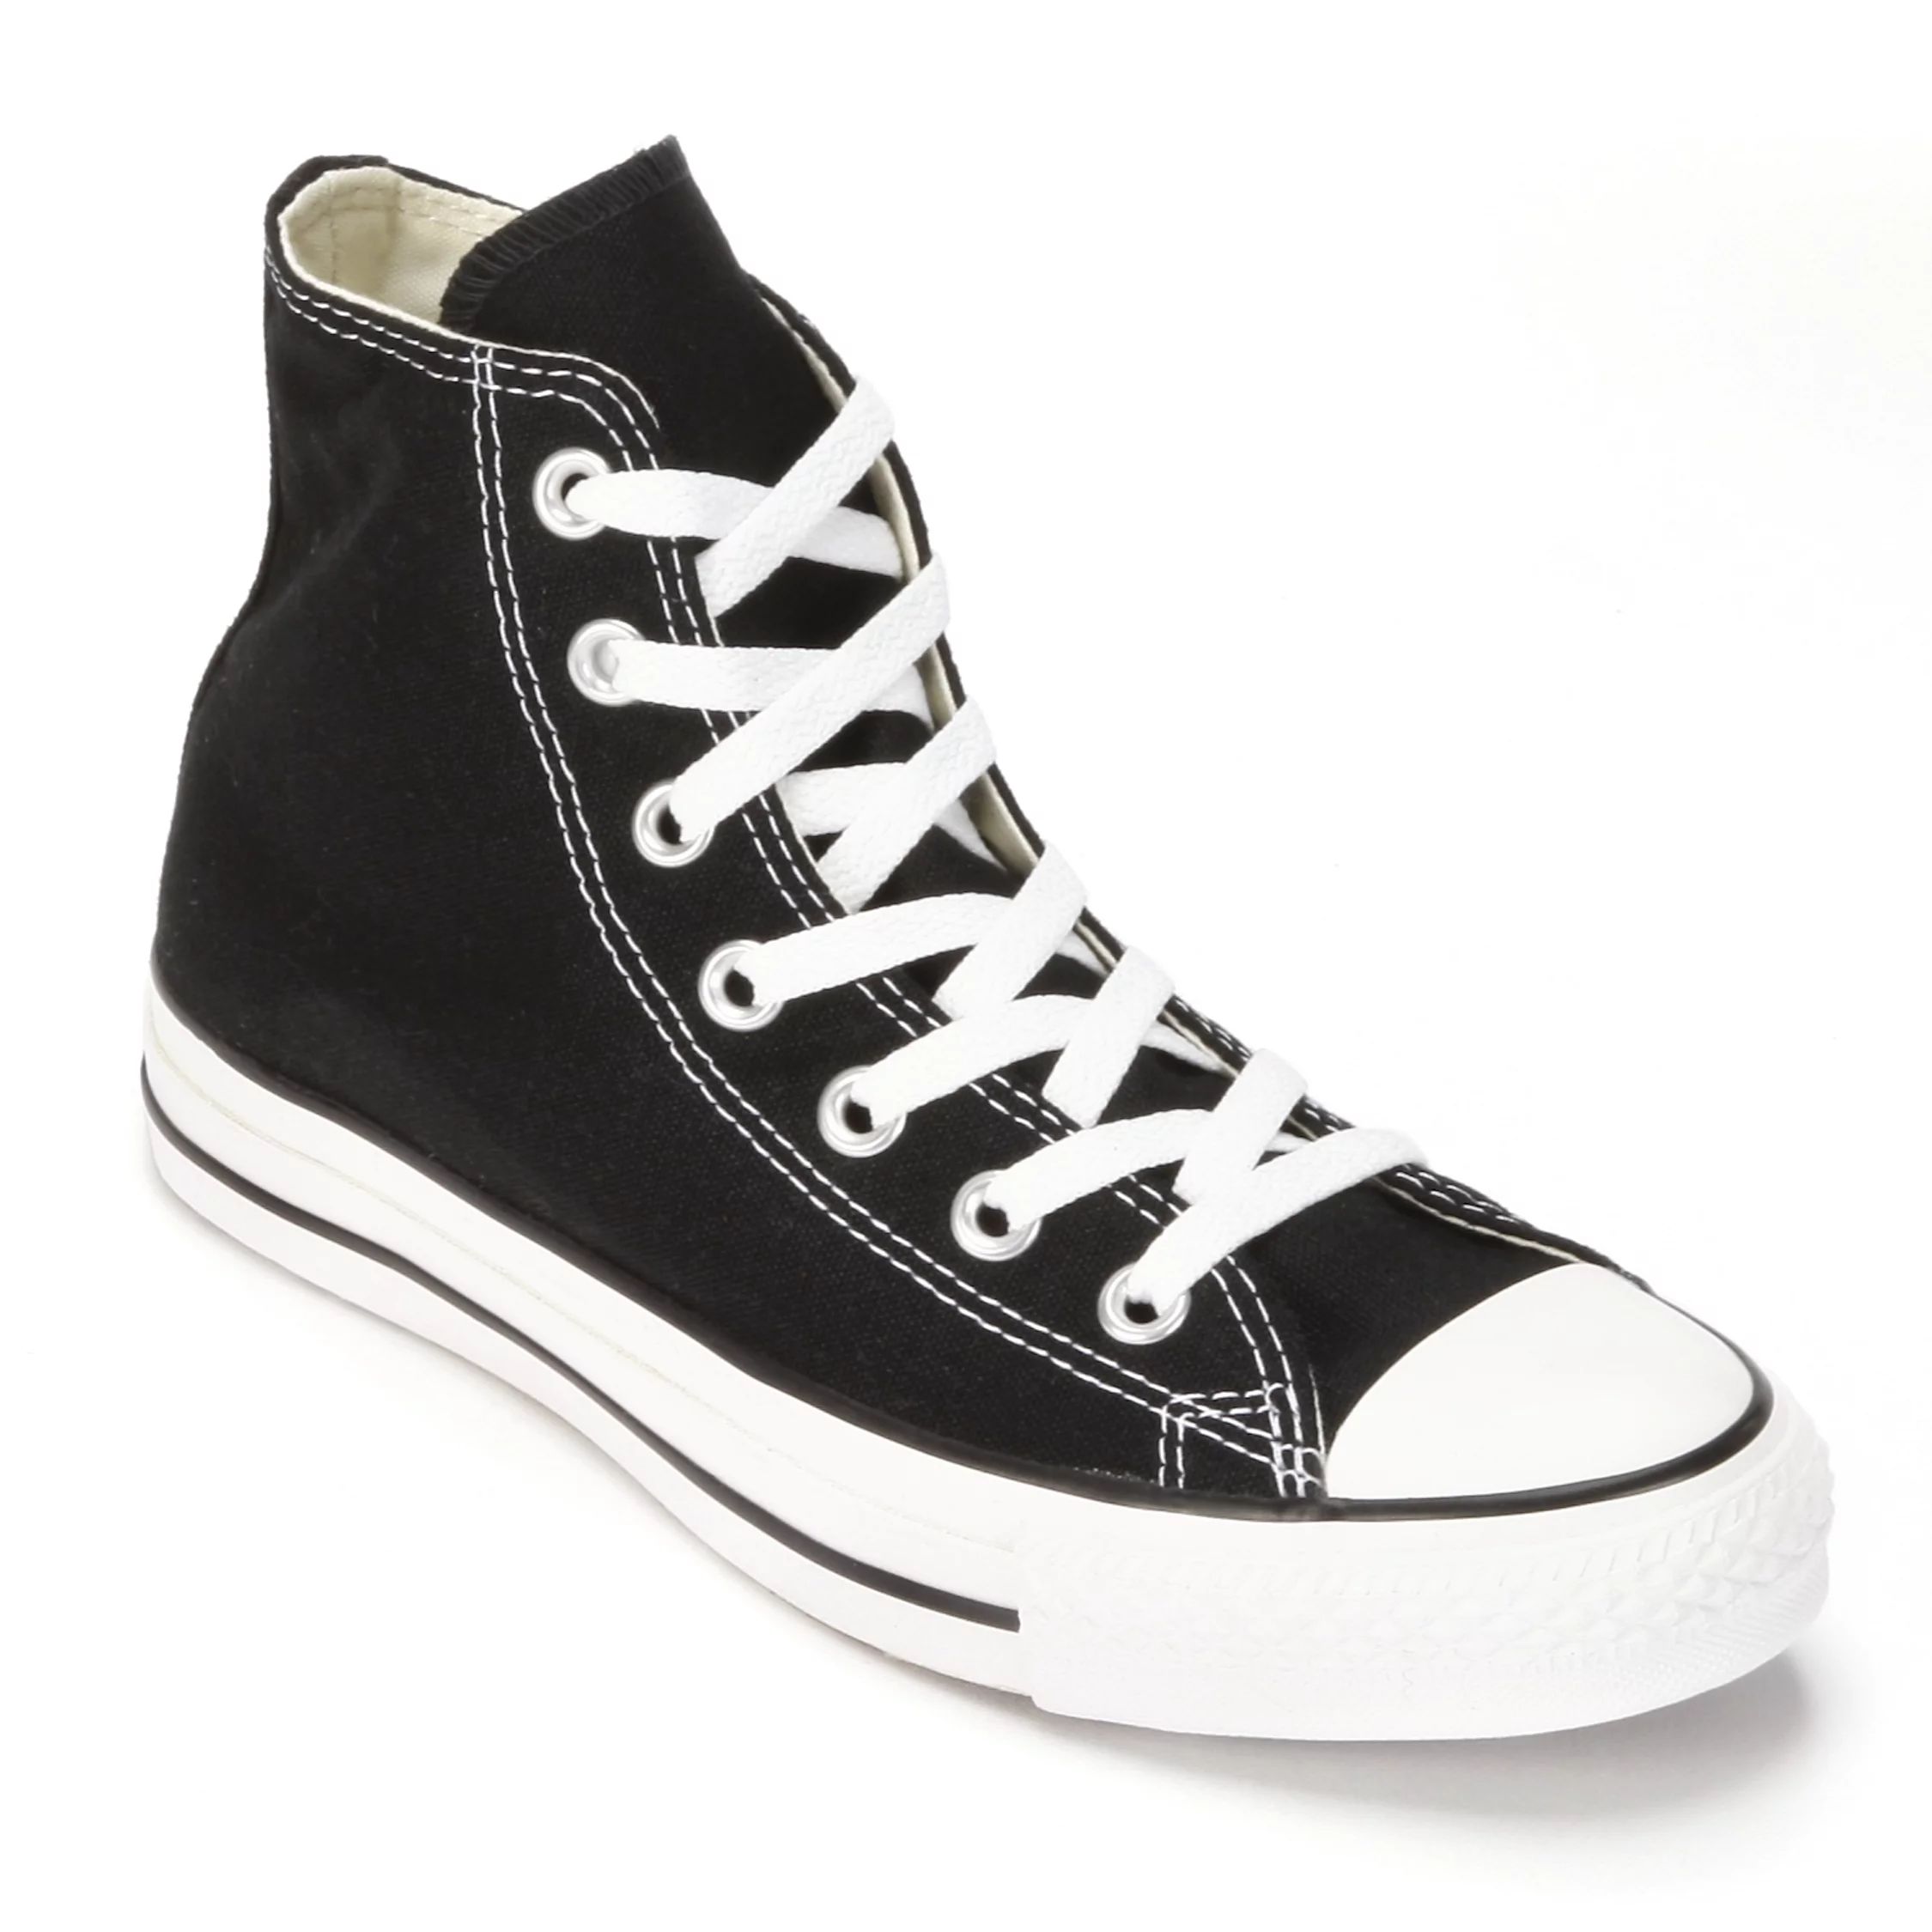 Adult Converse All Star Chuck Taylor High-Top Sneakers | Kohl's